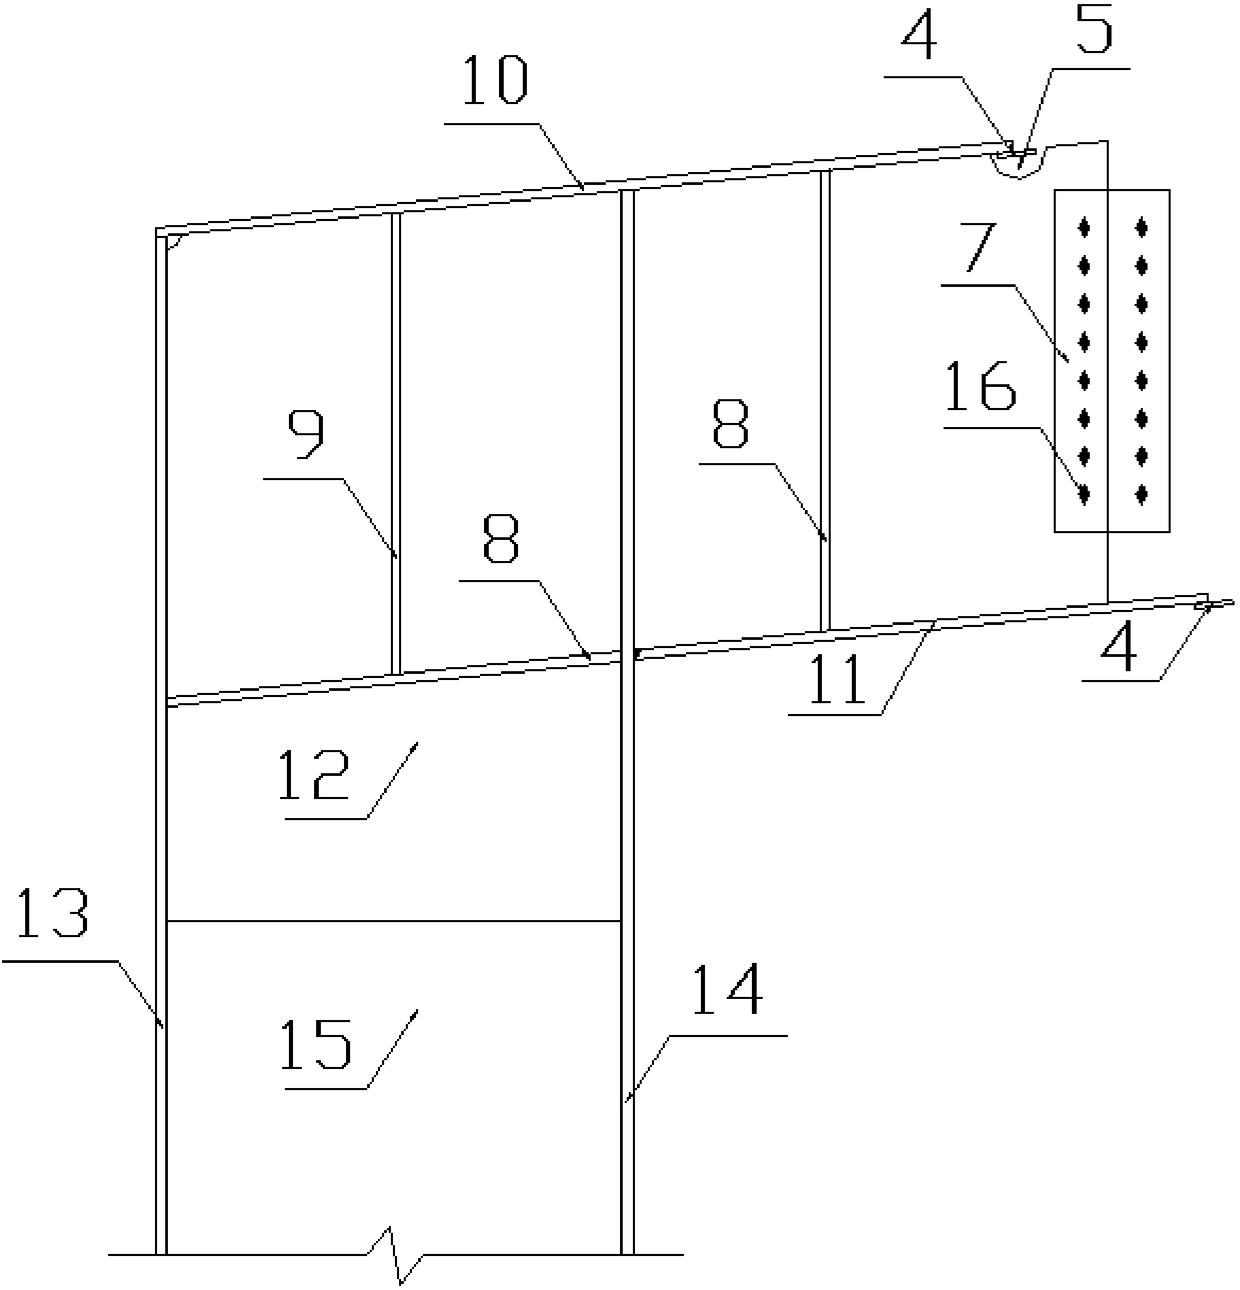 Beam-column connecting joint structure